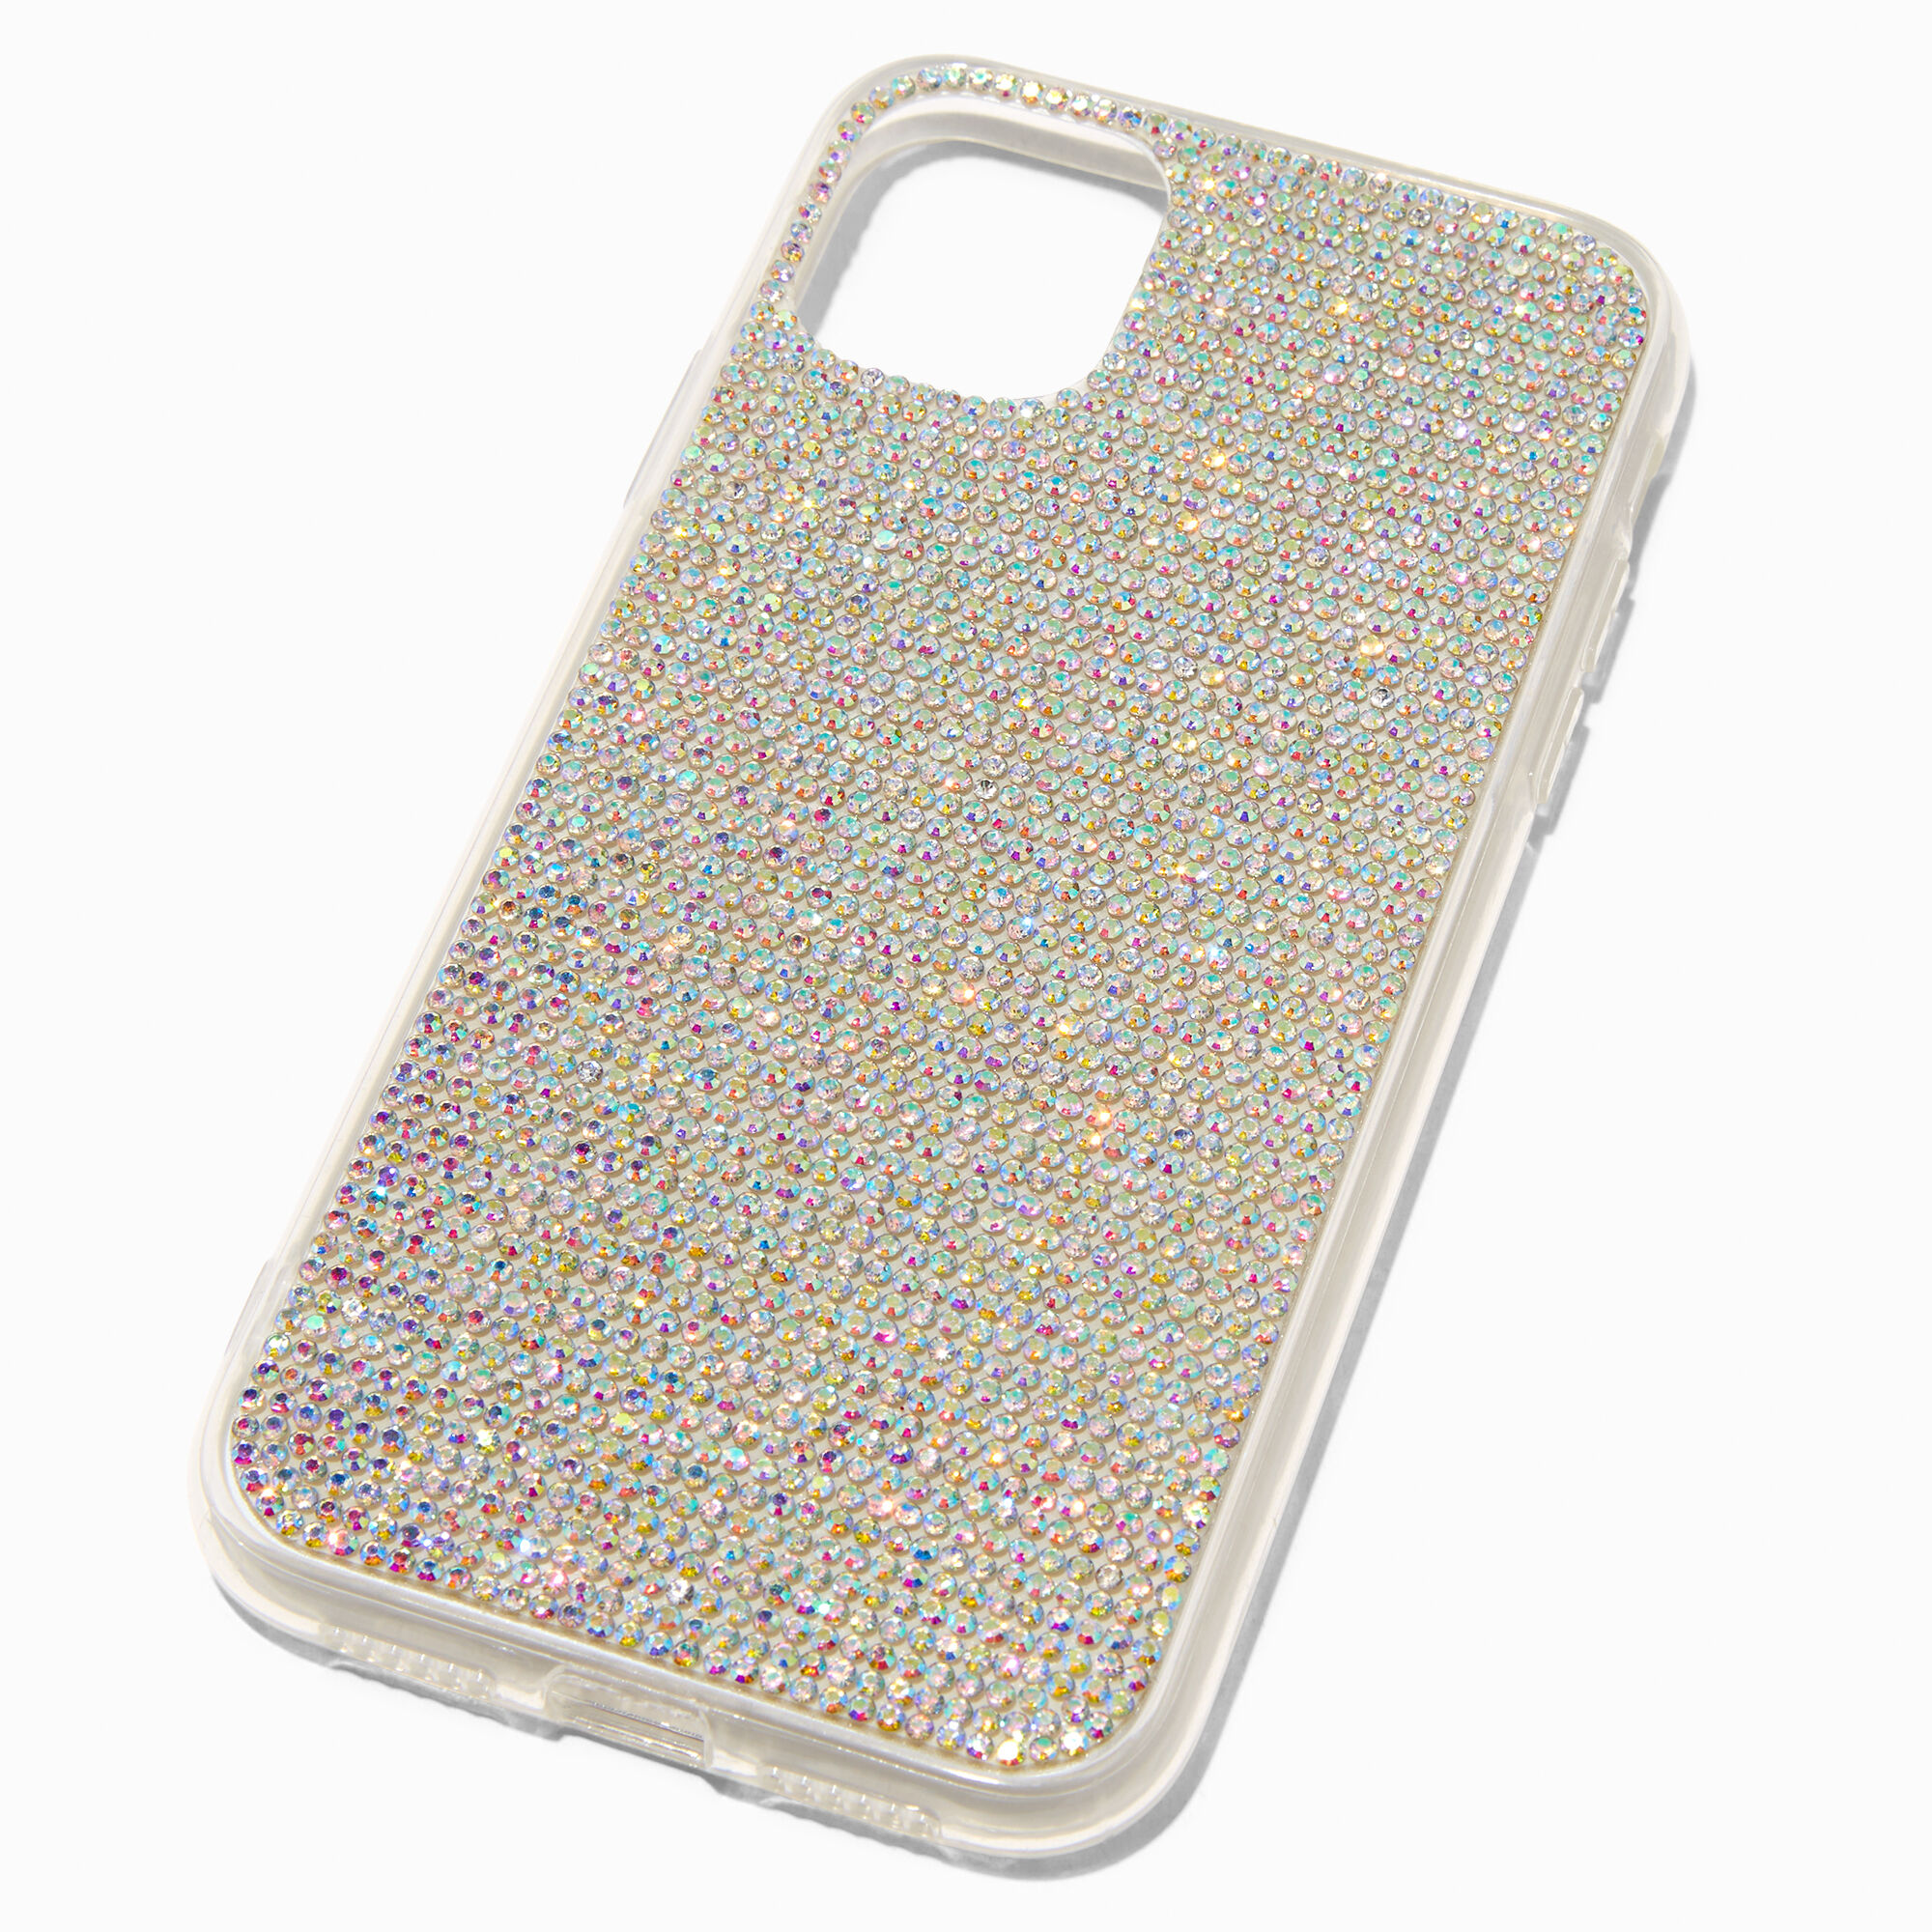 View Claires Paved Crystal Protective Phone Case Fits Iphone 11 information